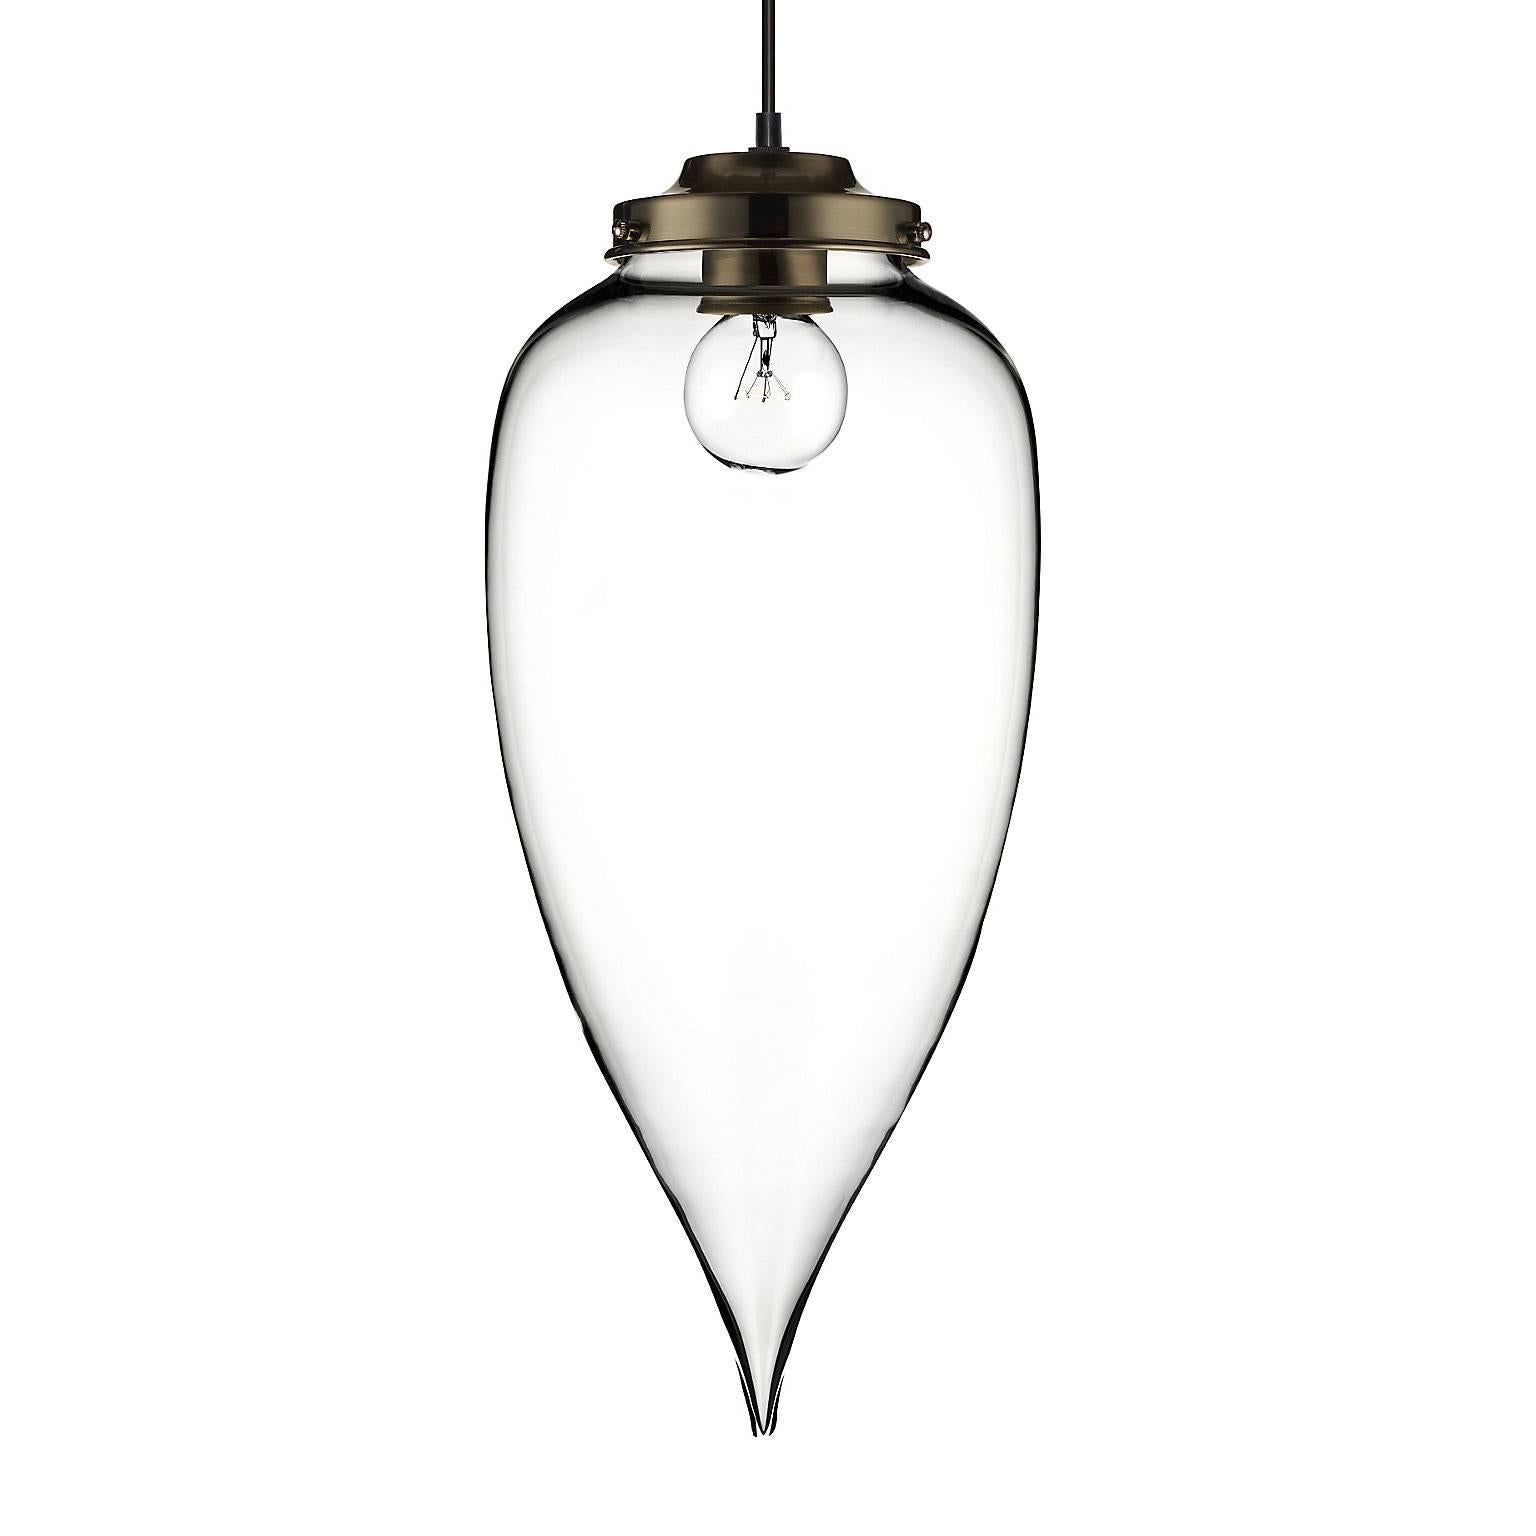 American Pointelle Grand Opaline Handblown Modern Glass Pendant Light, Made in the USA For Sale